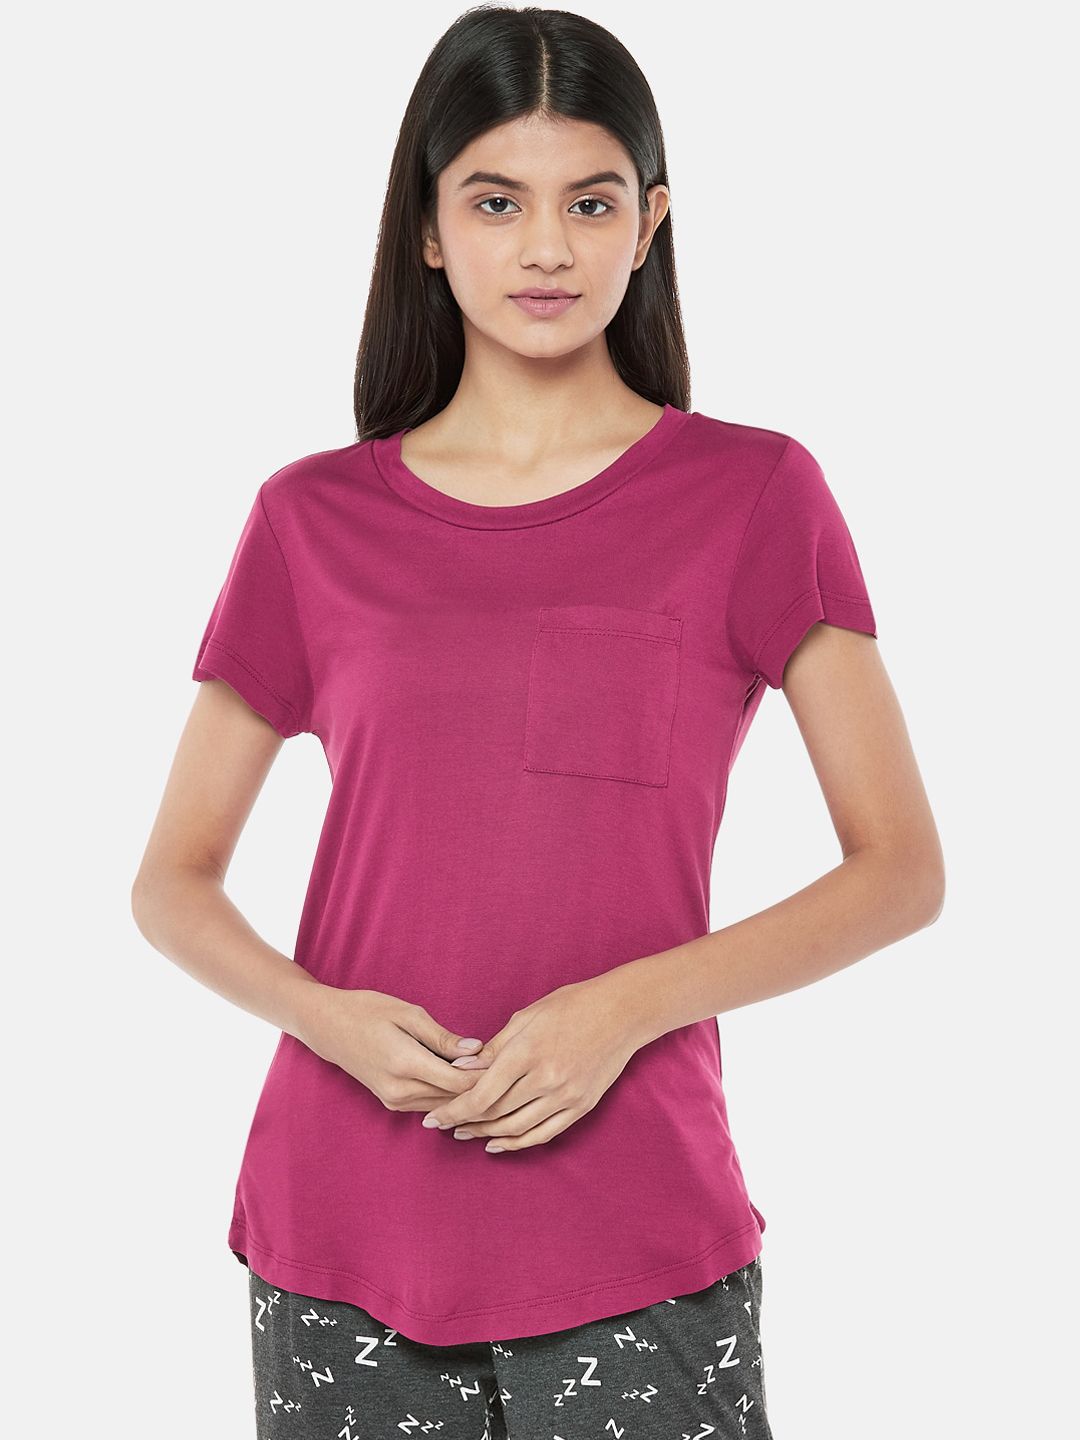 Dreamz by Pantaloons Women Purple Solid Lounge T-shirt Price in India